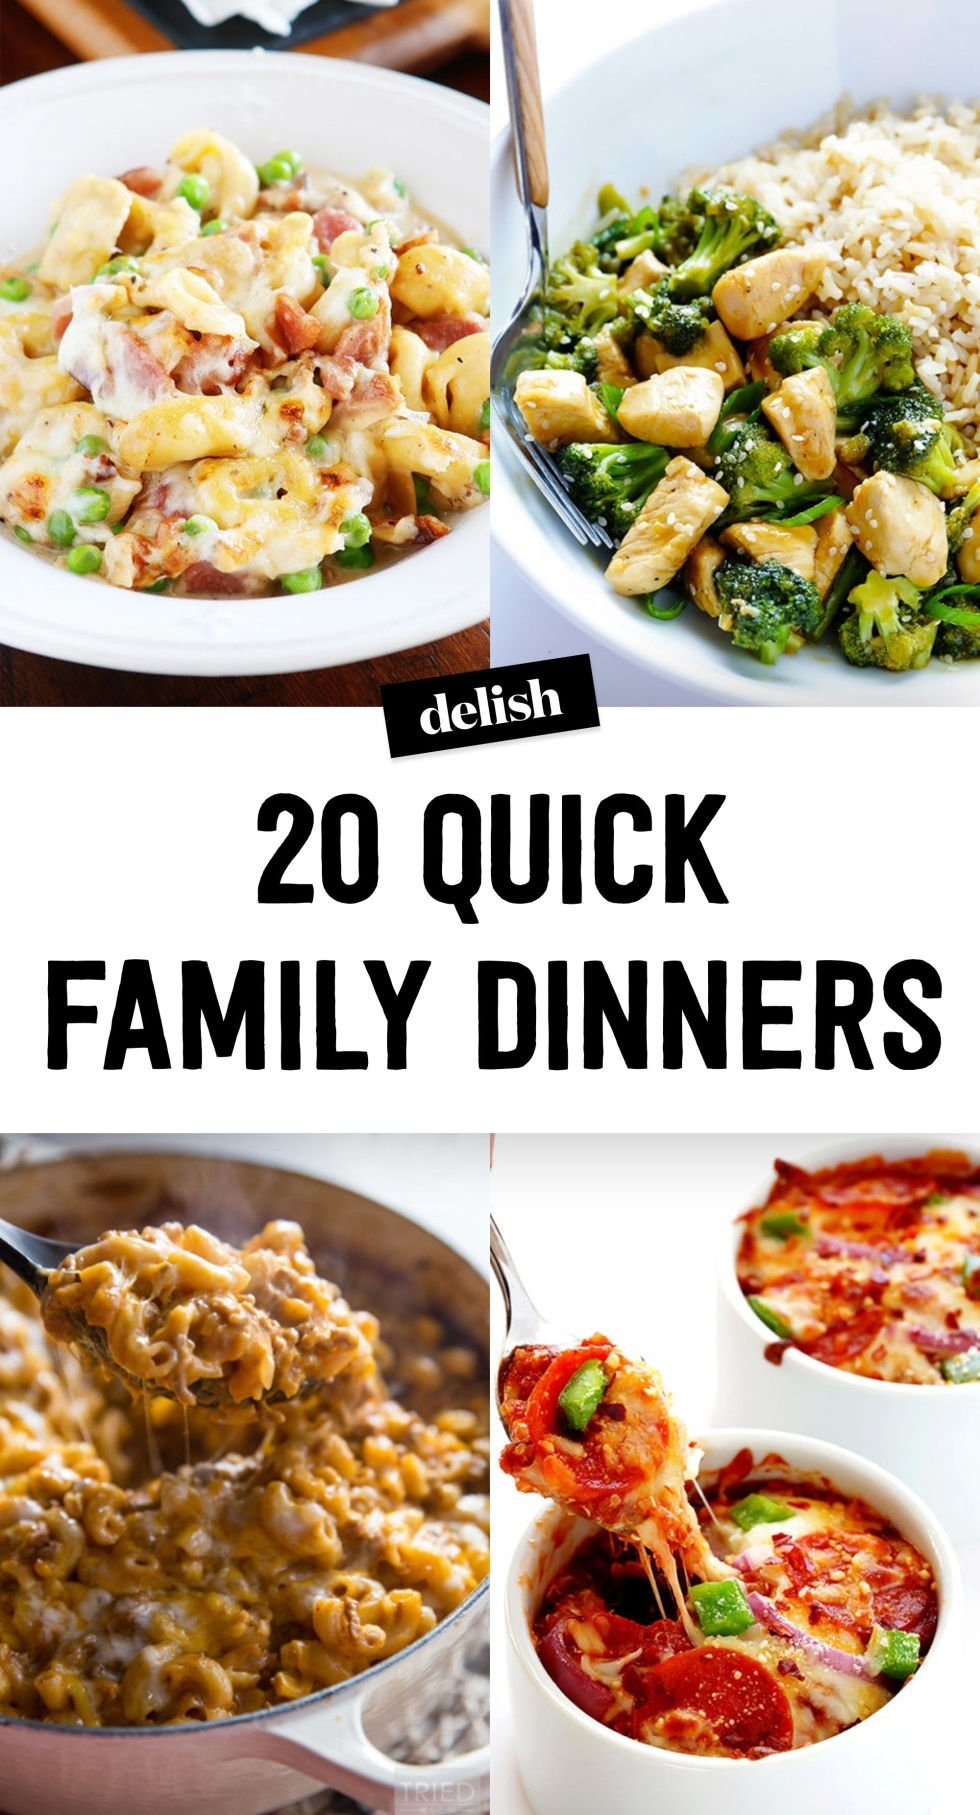 10 Stylish Easy And Quick Dinner Ideas 2020